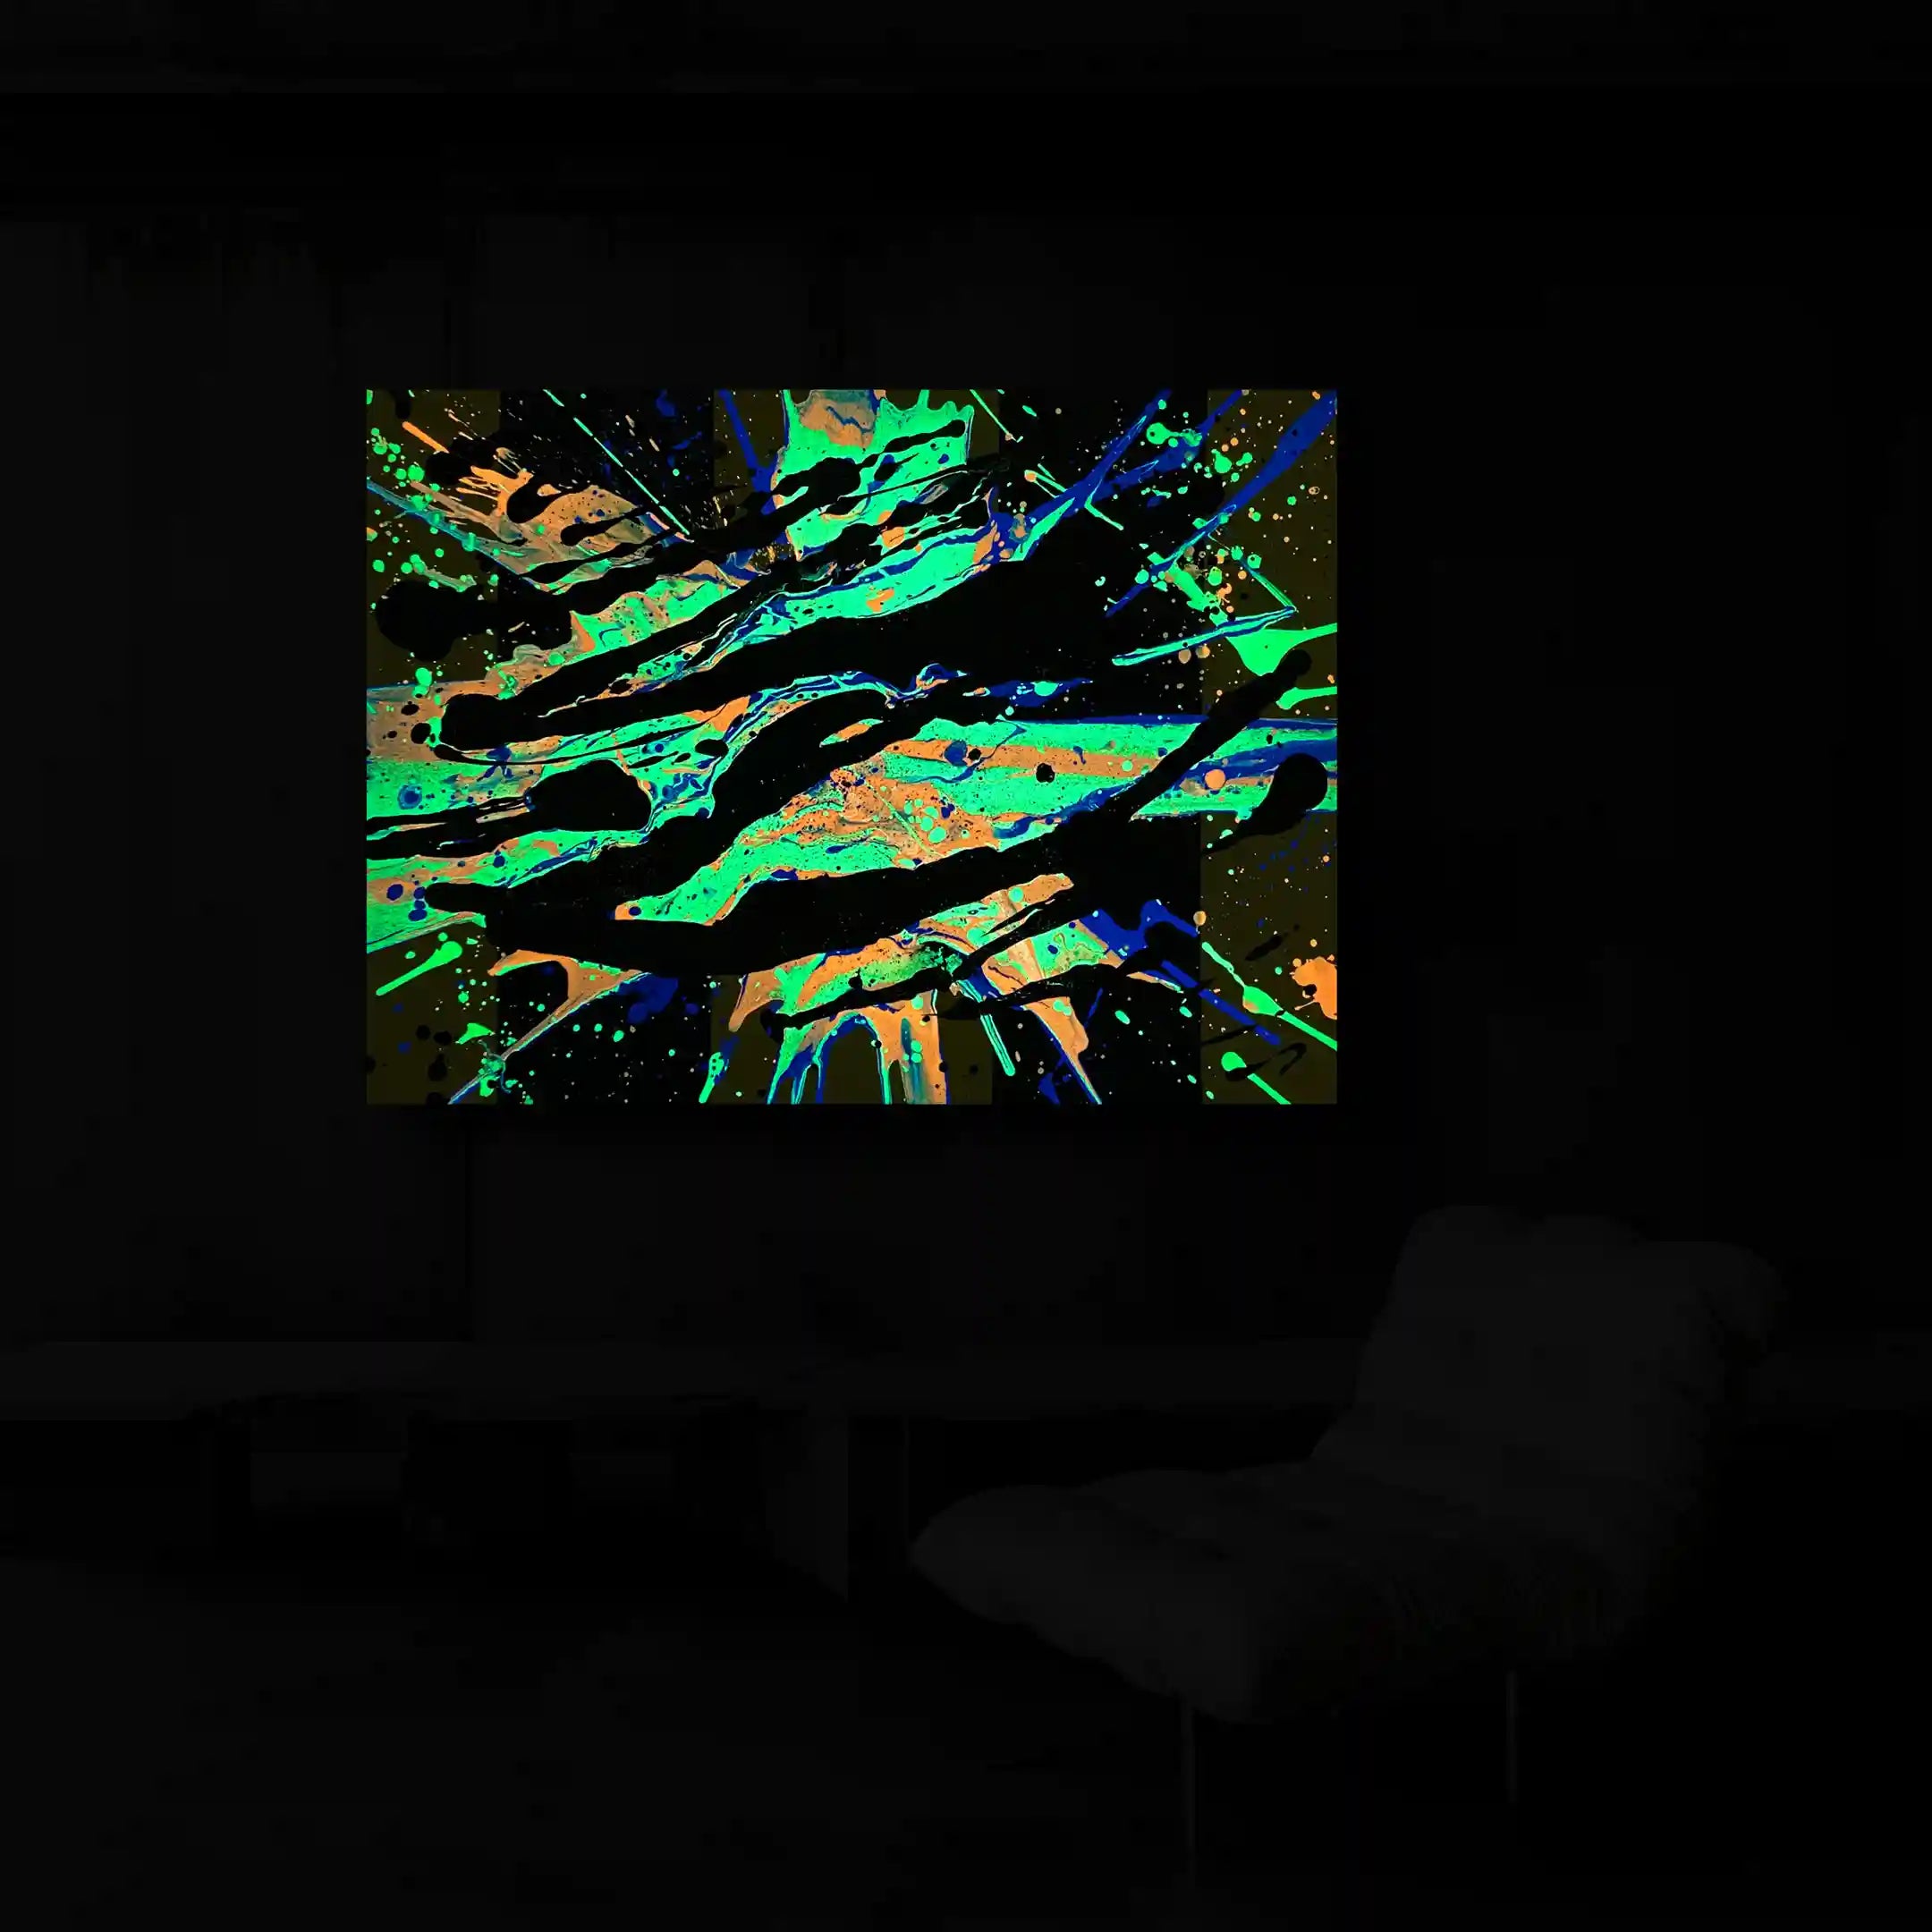 Glow in the dark spin art painting titled Super Nova Flare with a dazzling burst of bright yellow and orange streaks from a central white-hot core, set against a deep black backdrop